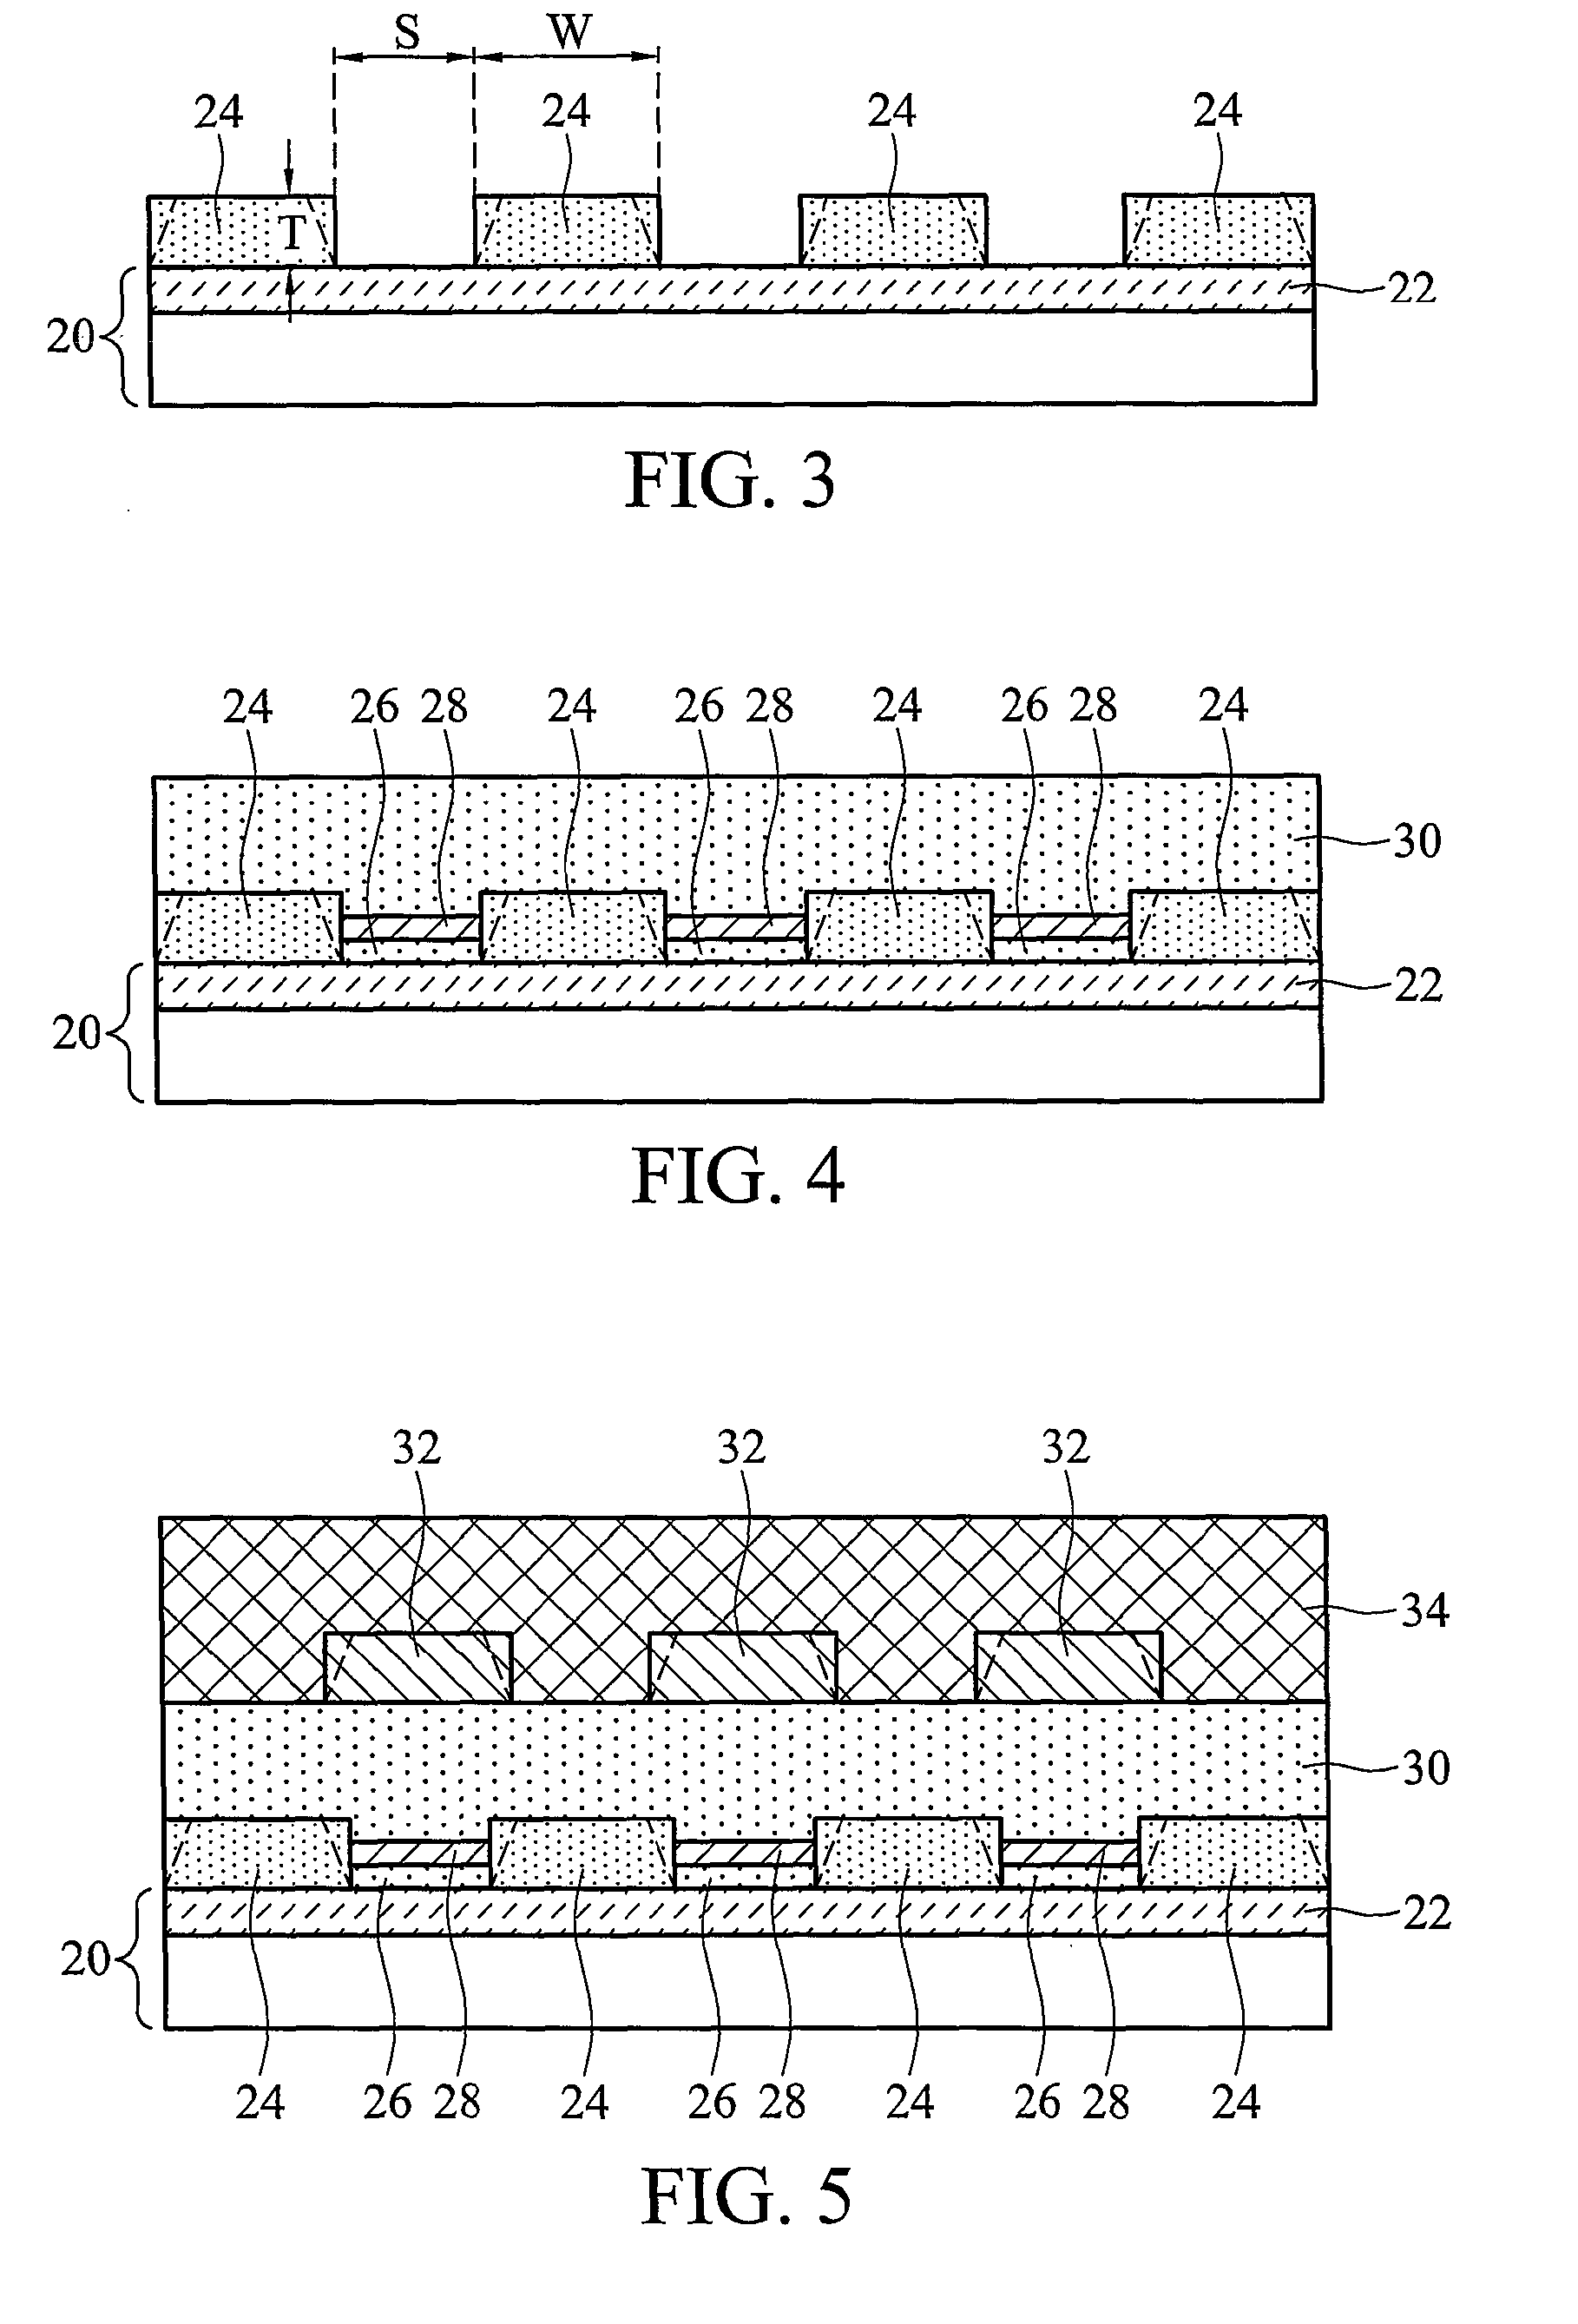 III-V compound semiconductor epitaxy using lateral overgrowth